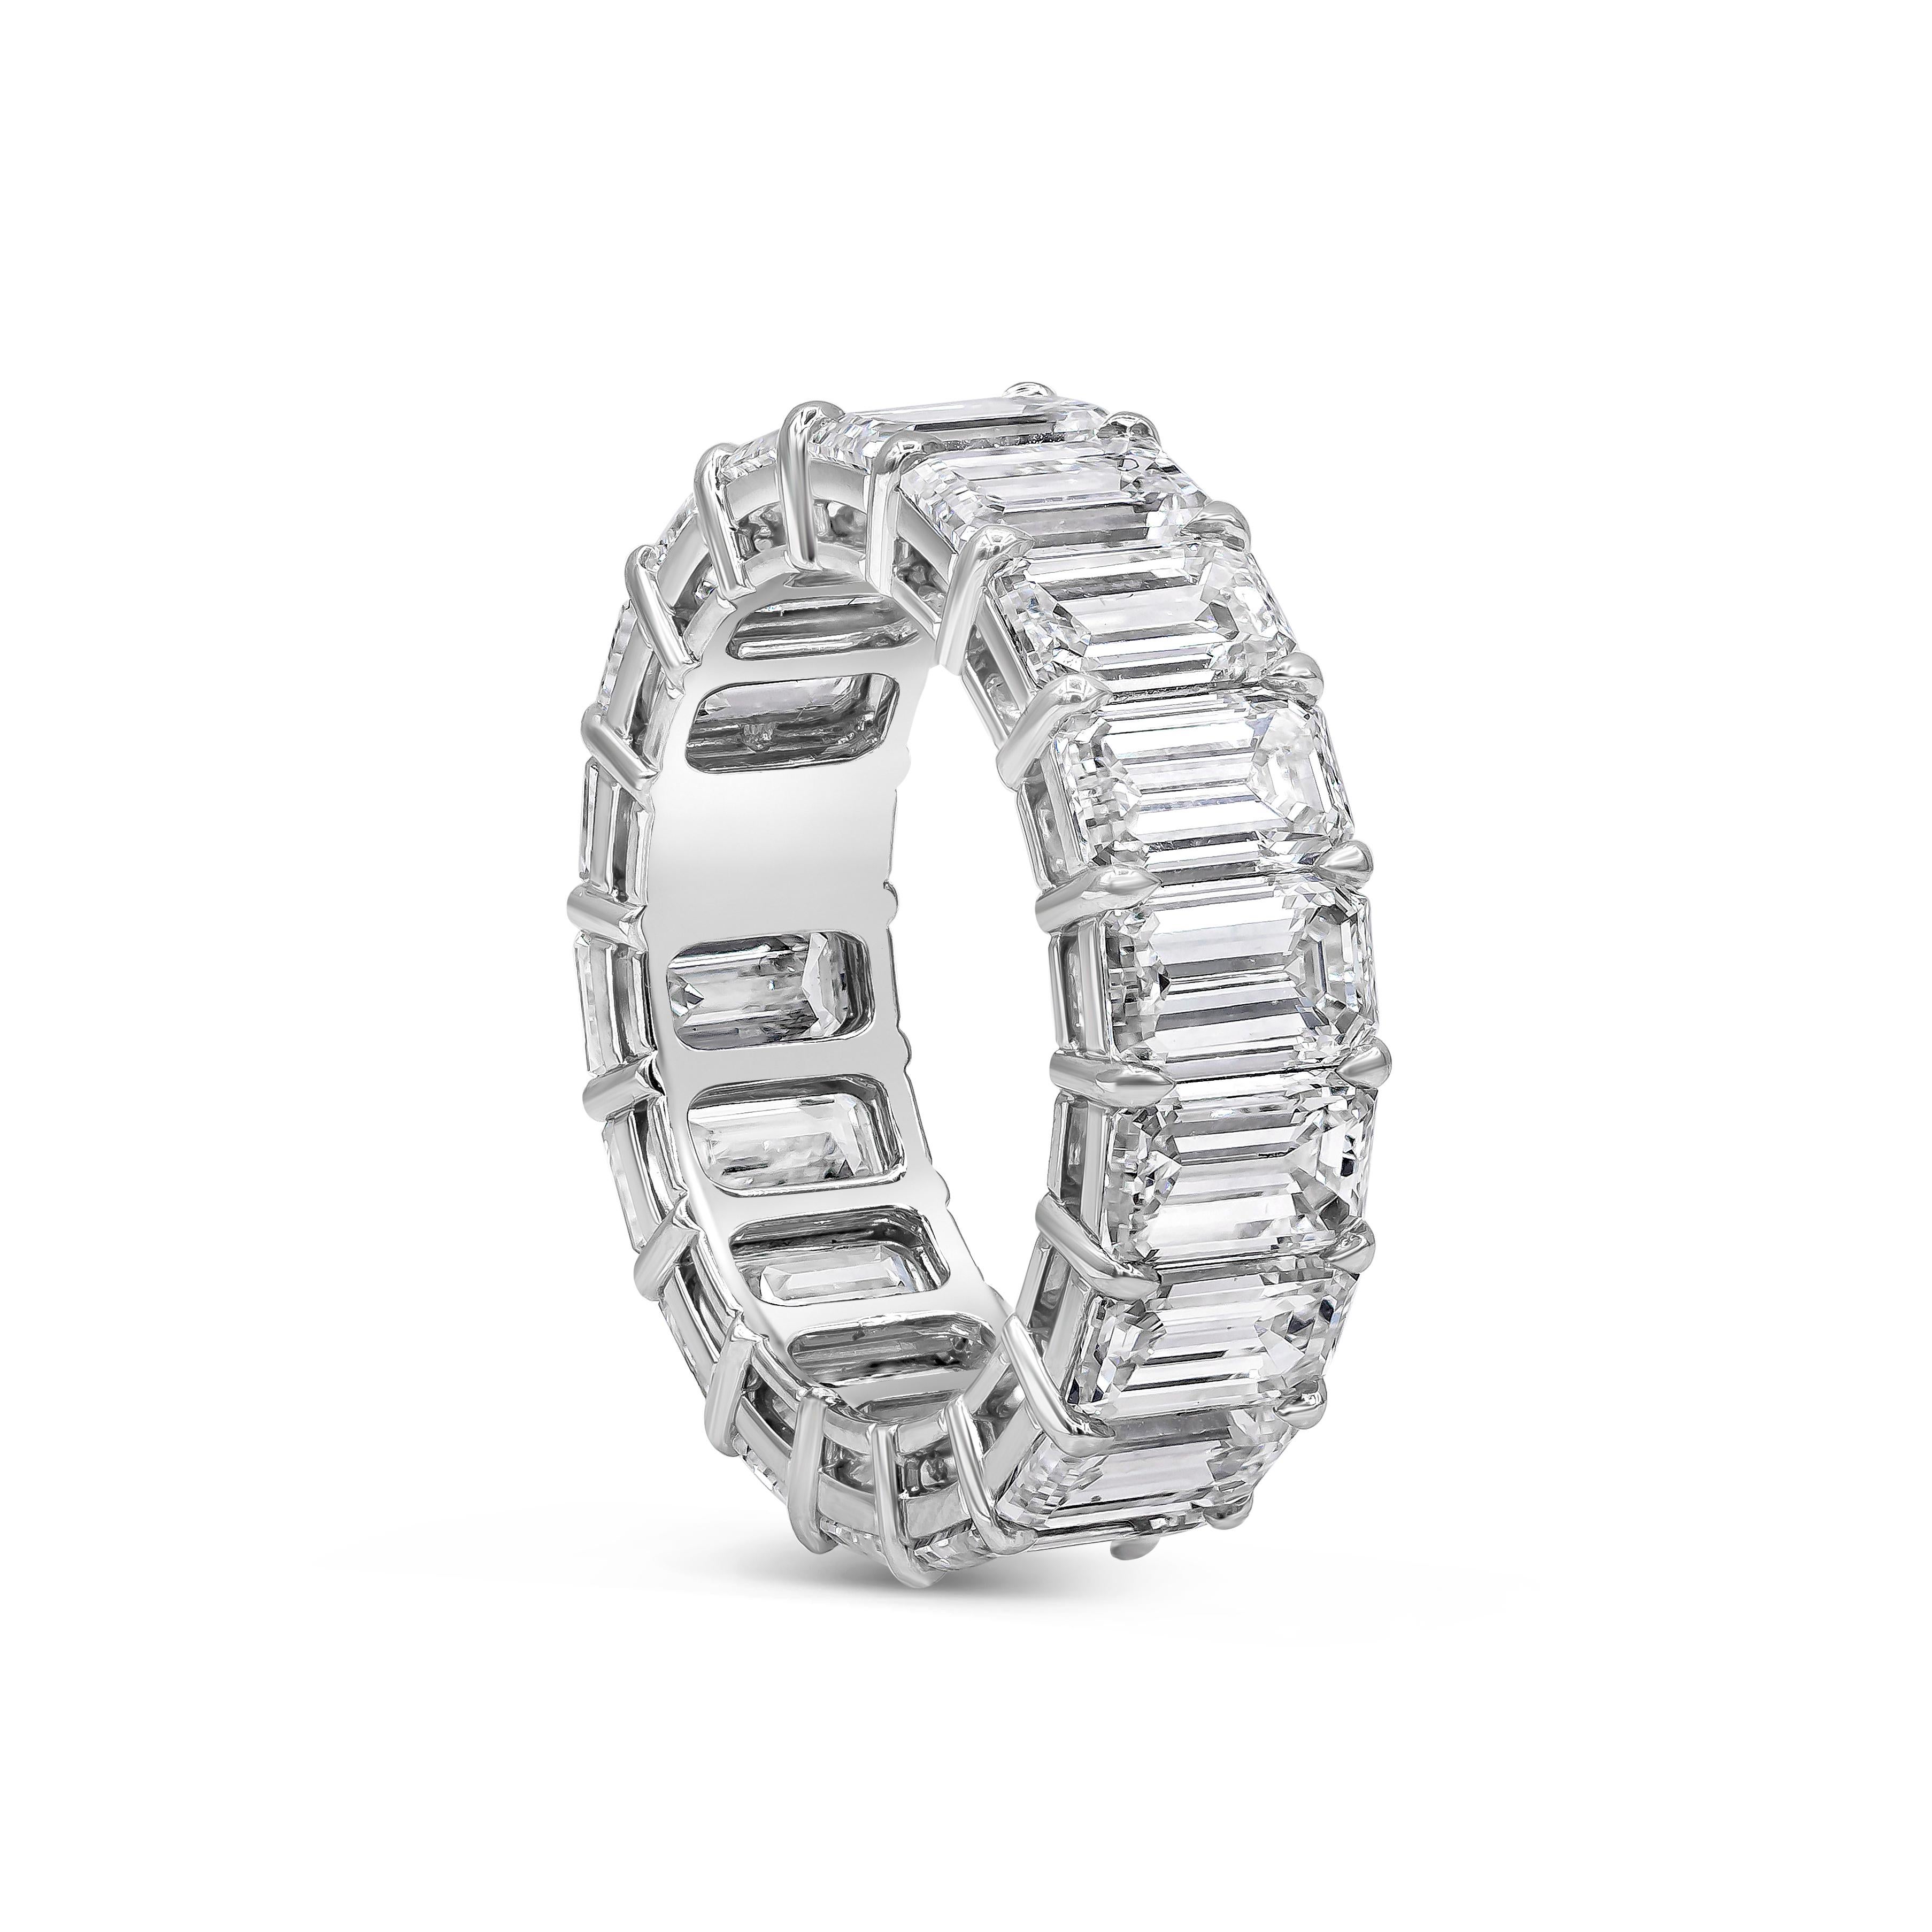 A timeless piece eternity wedding band ring showcasing emerald cut diamonds of 9.94 carats total, F color and VS clarity. Set in an open gallery setting made in platinum, size 6 US.

Roman Malakov is a custom house, specializing in creating anything